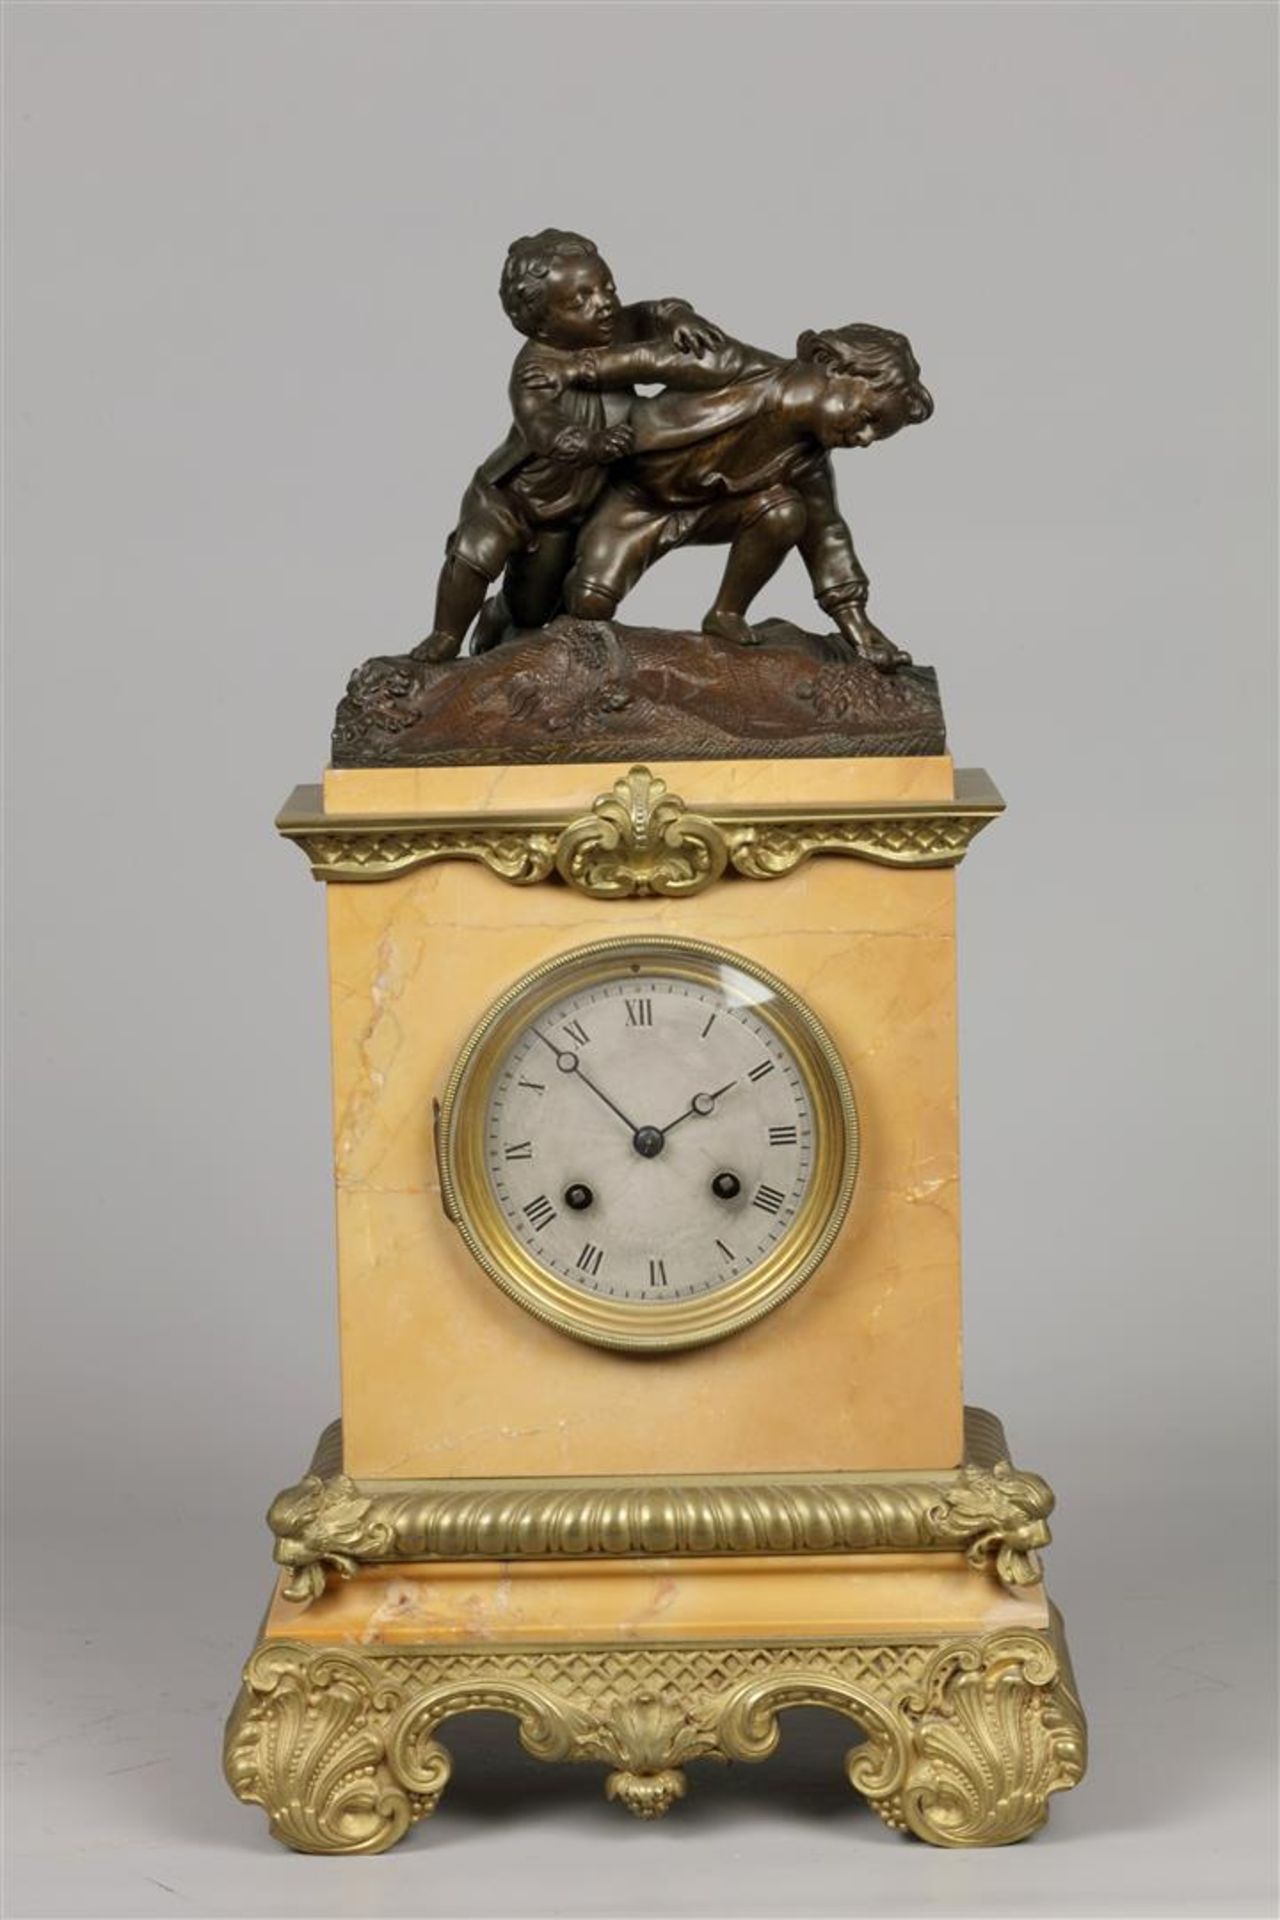 A yellow marble mantel clock with bronze ornaments, on top 